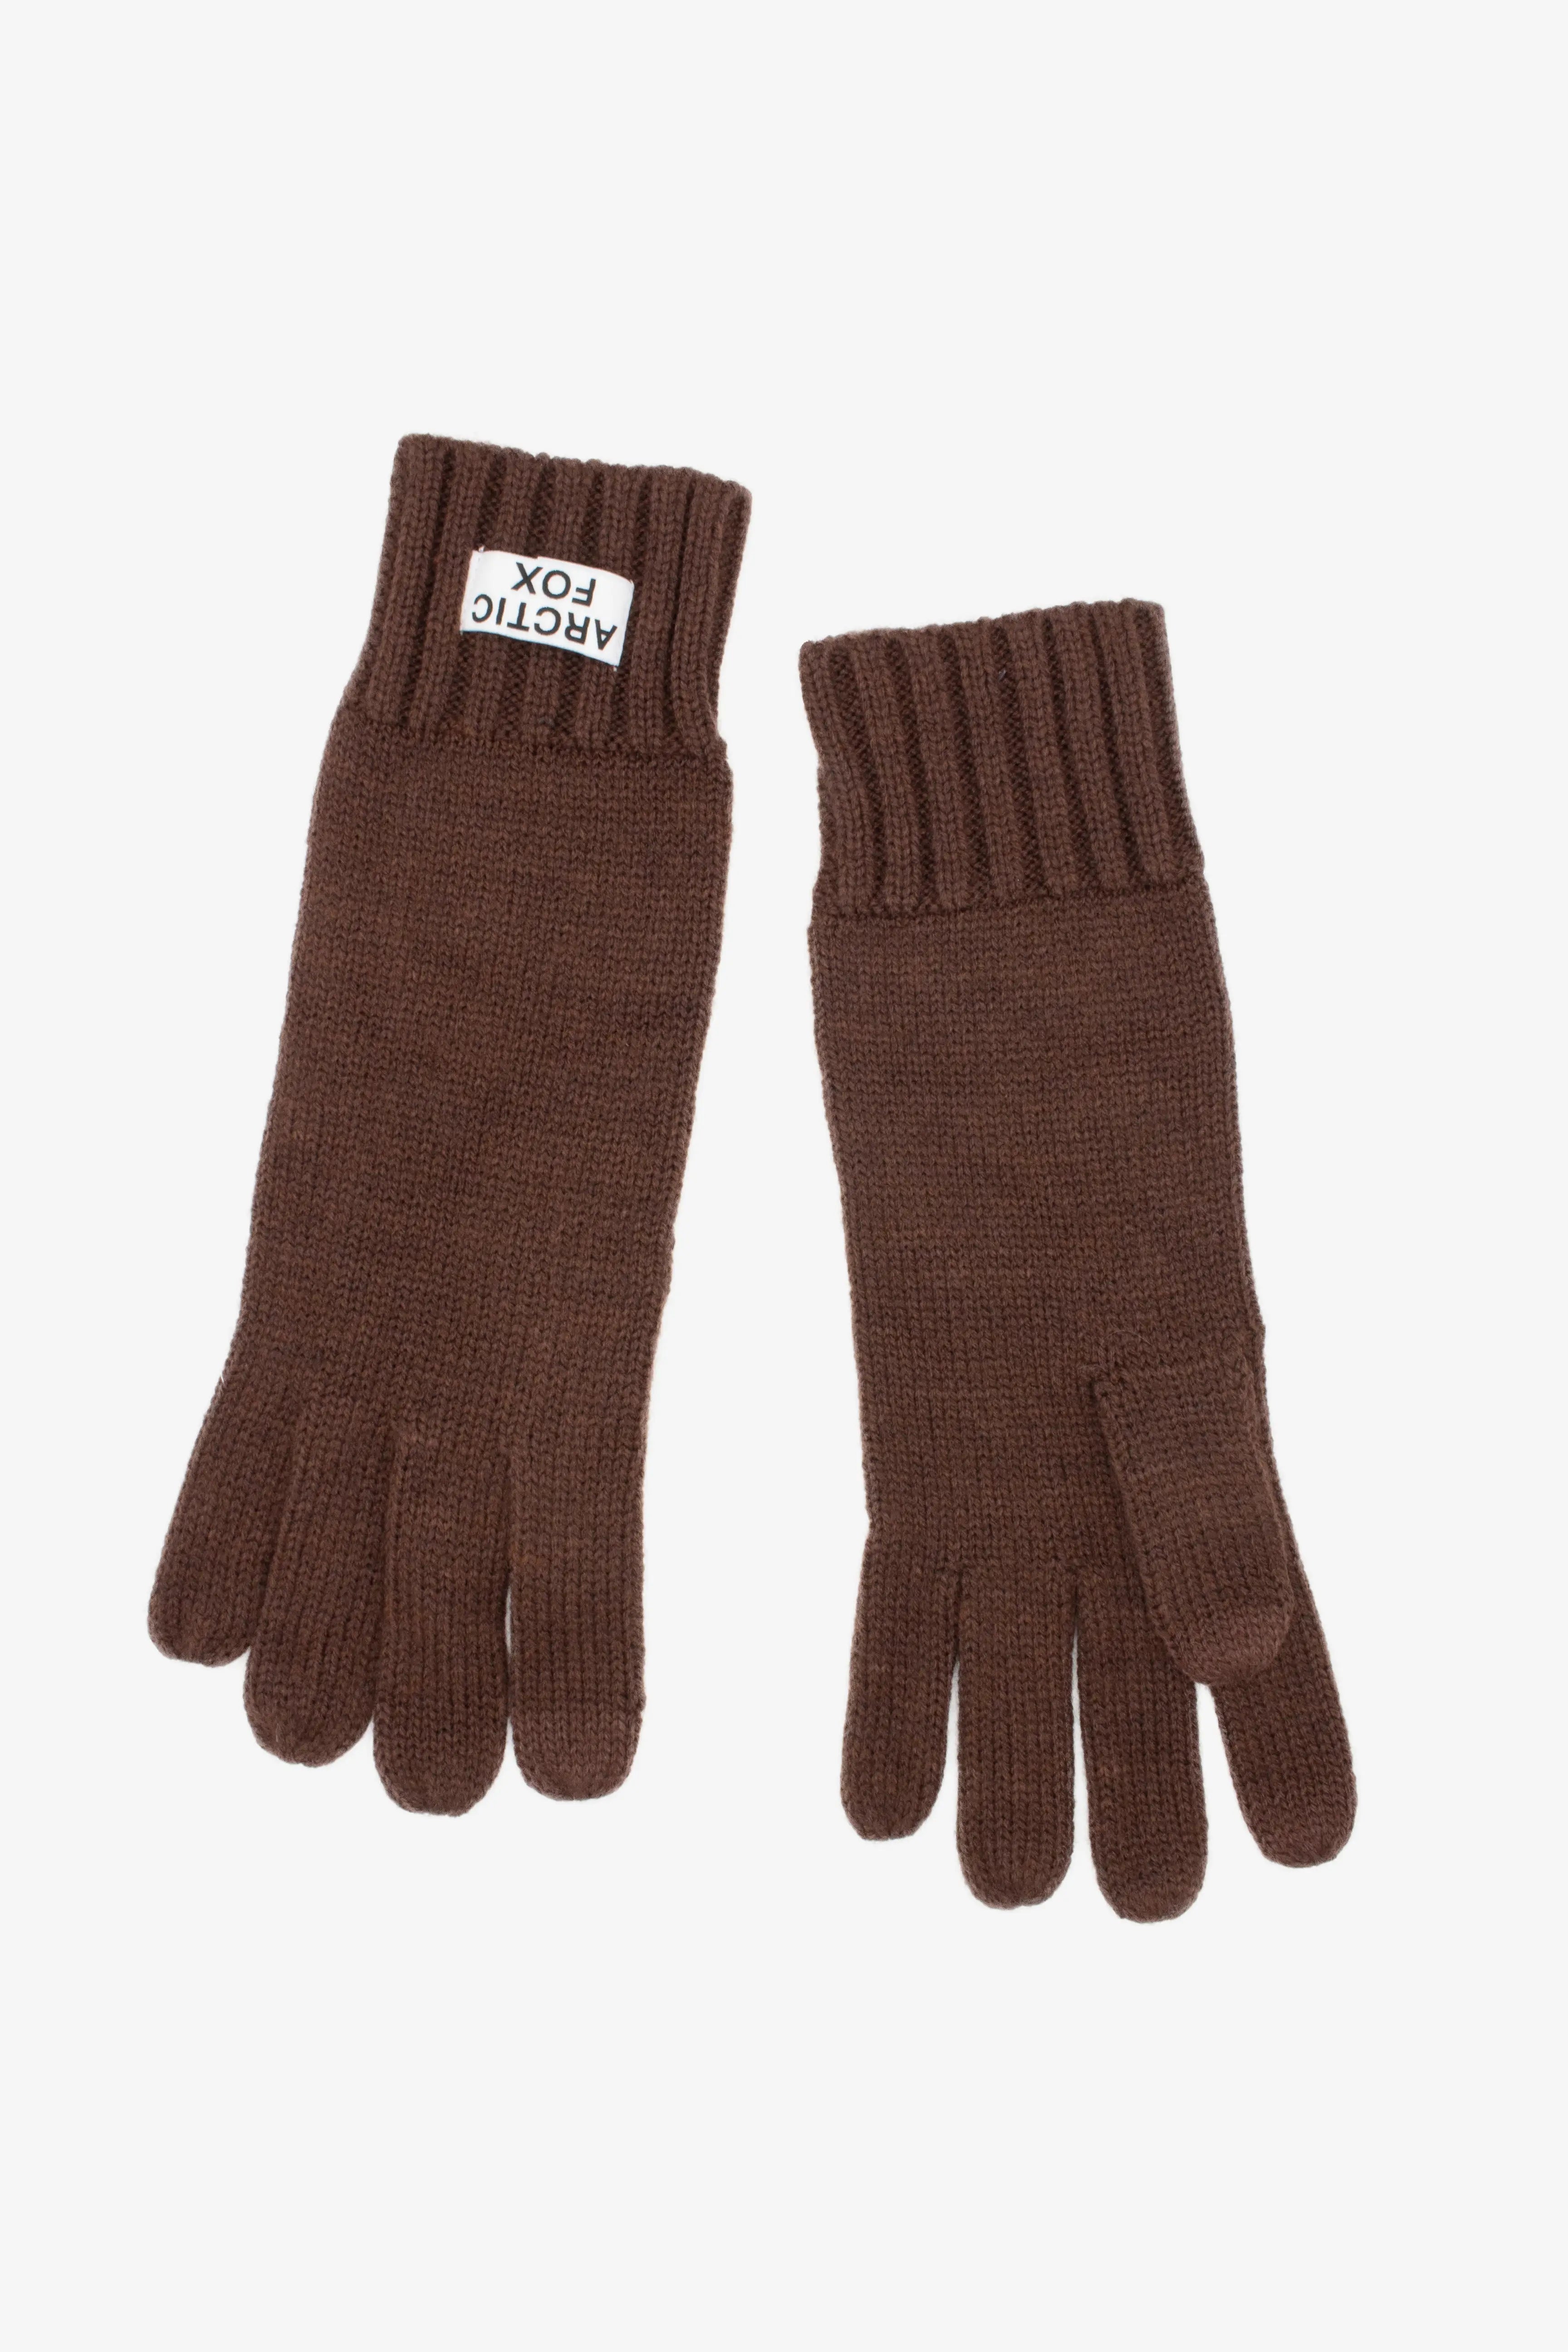 the recycled bottle gloves in chocolate by Arctic Fox & Co.